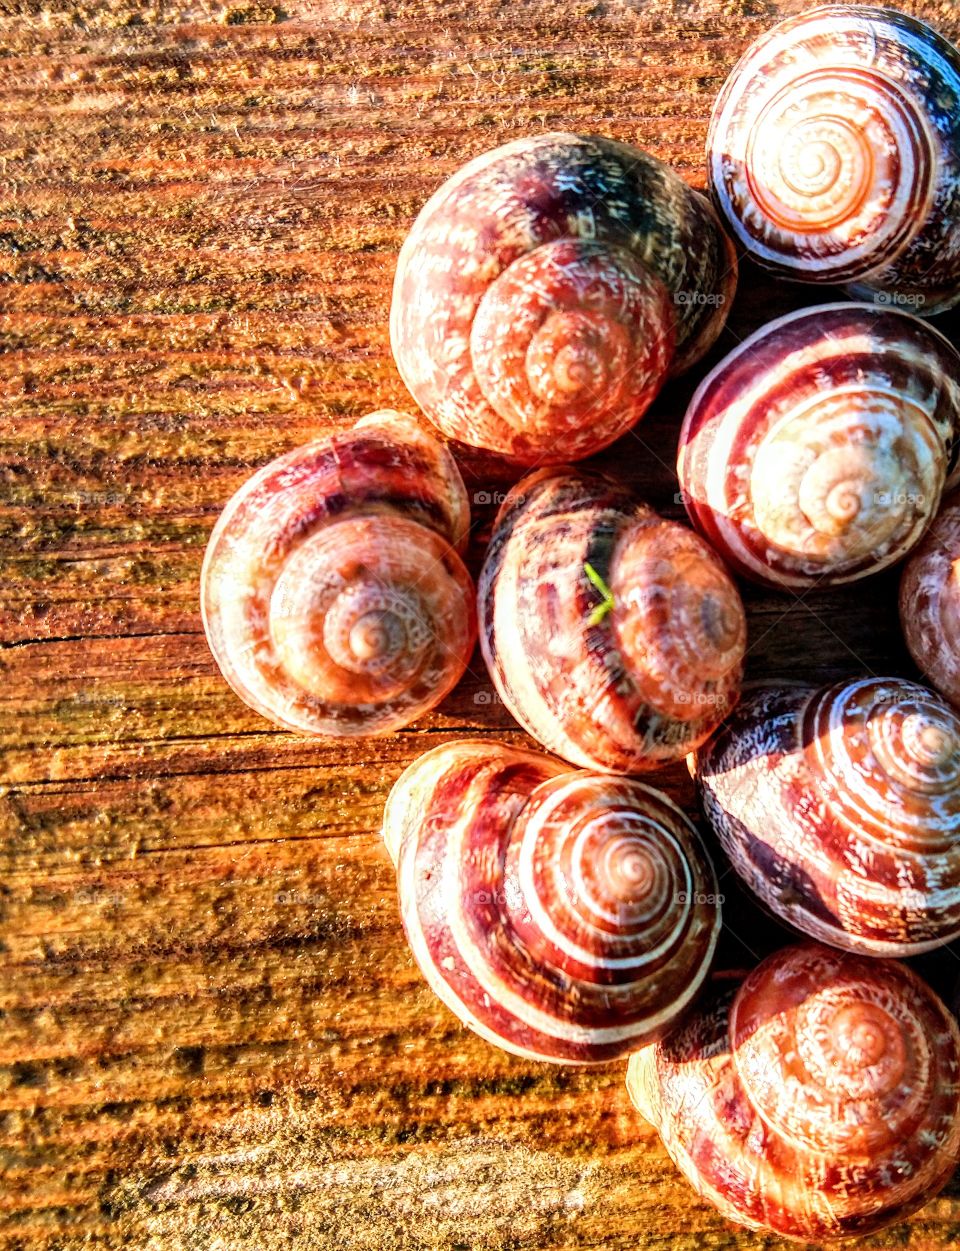 Snails texture on wood